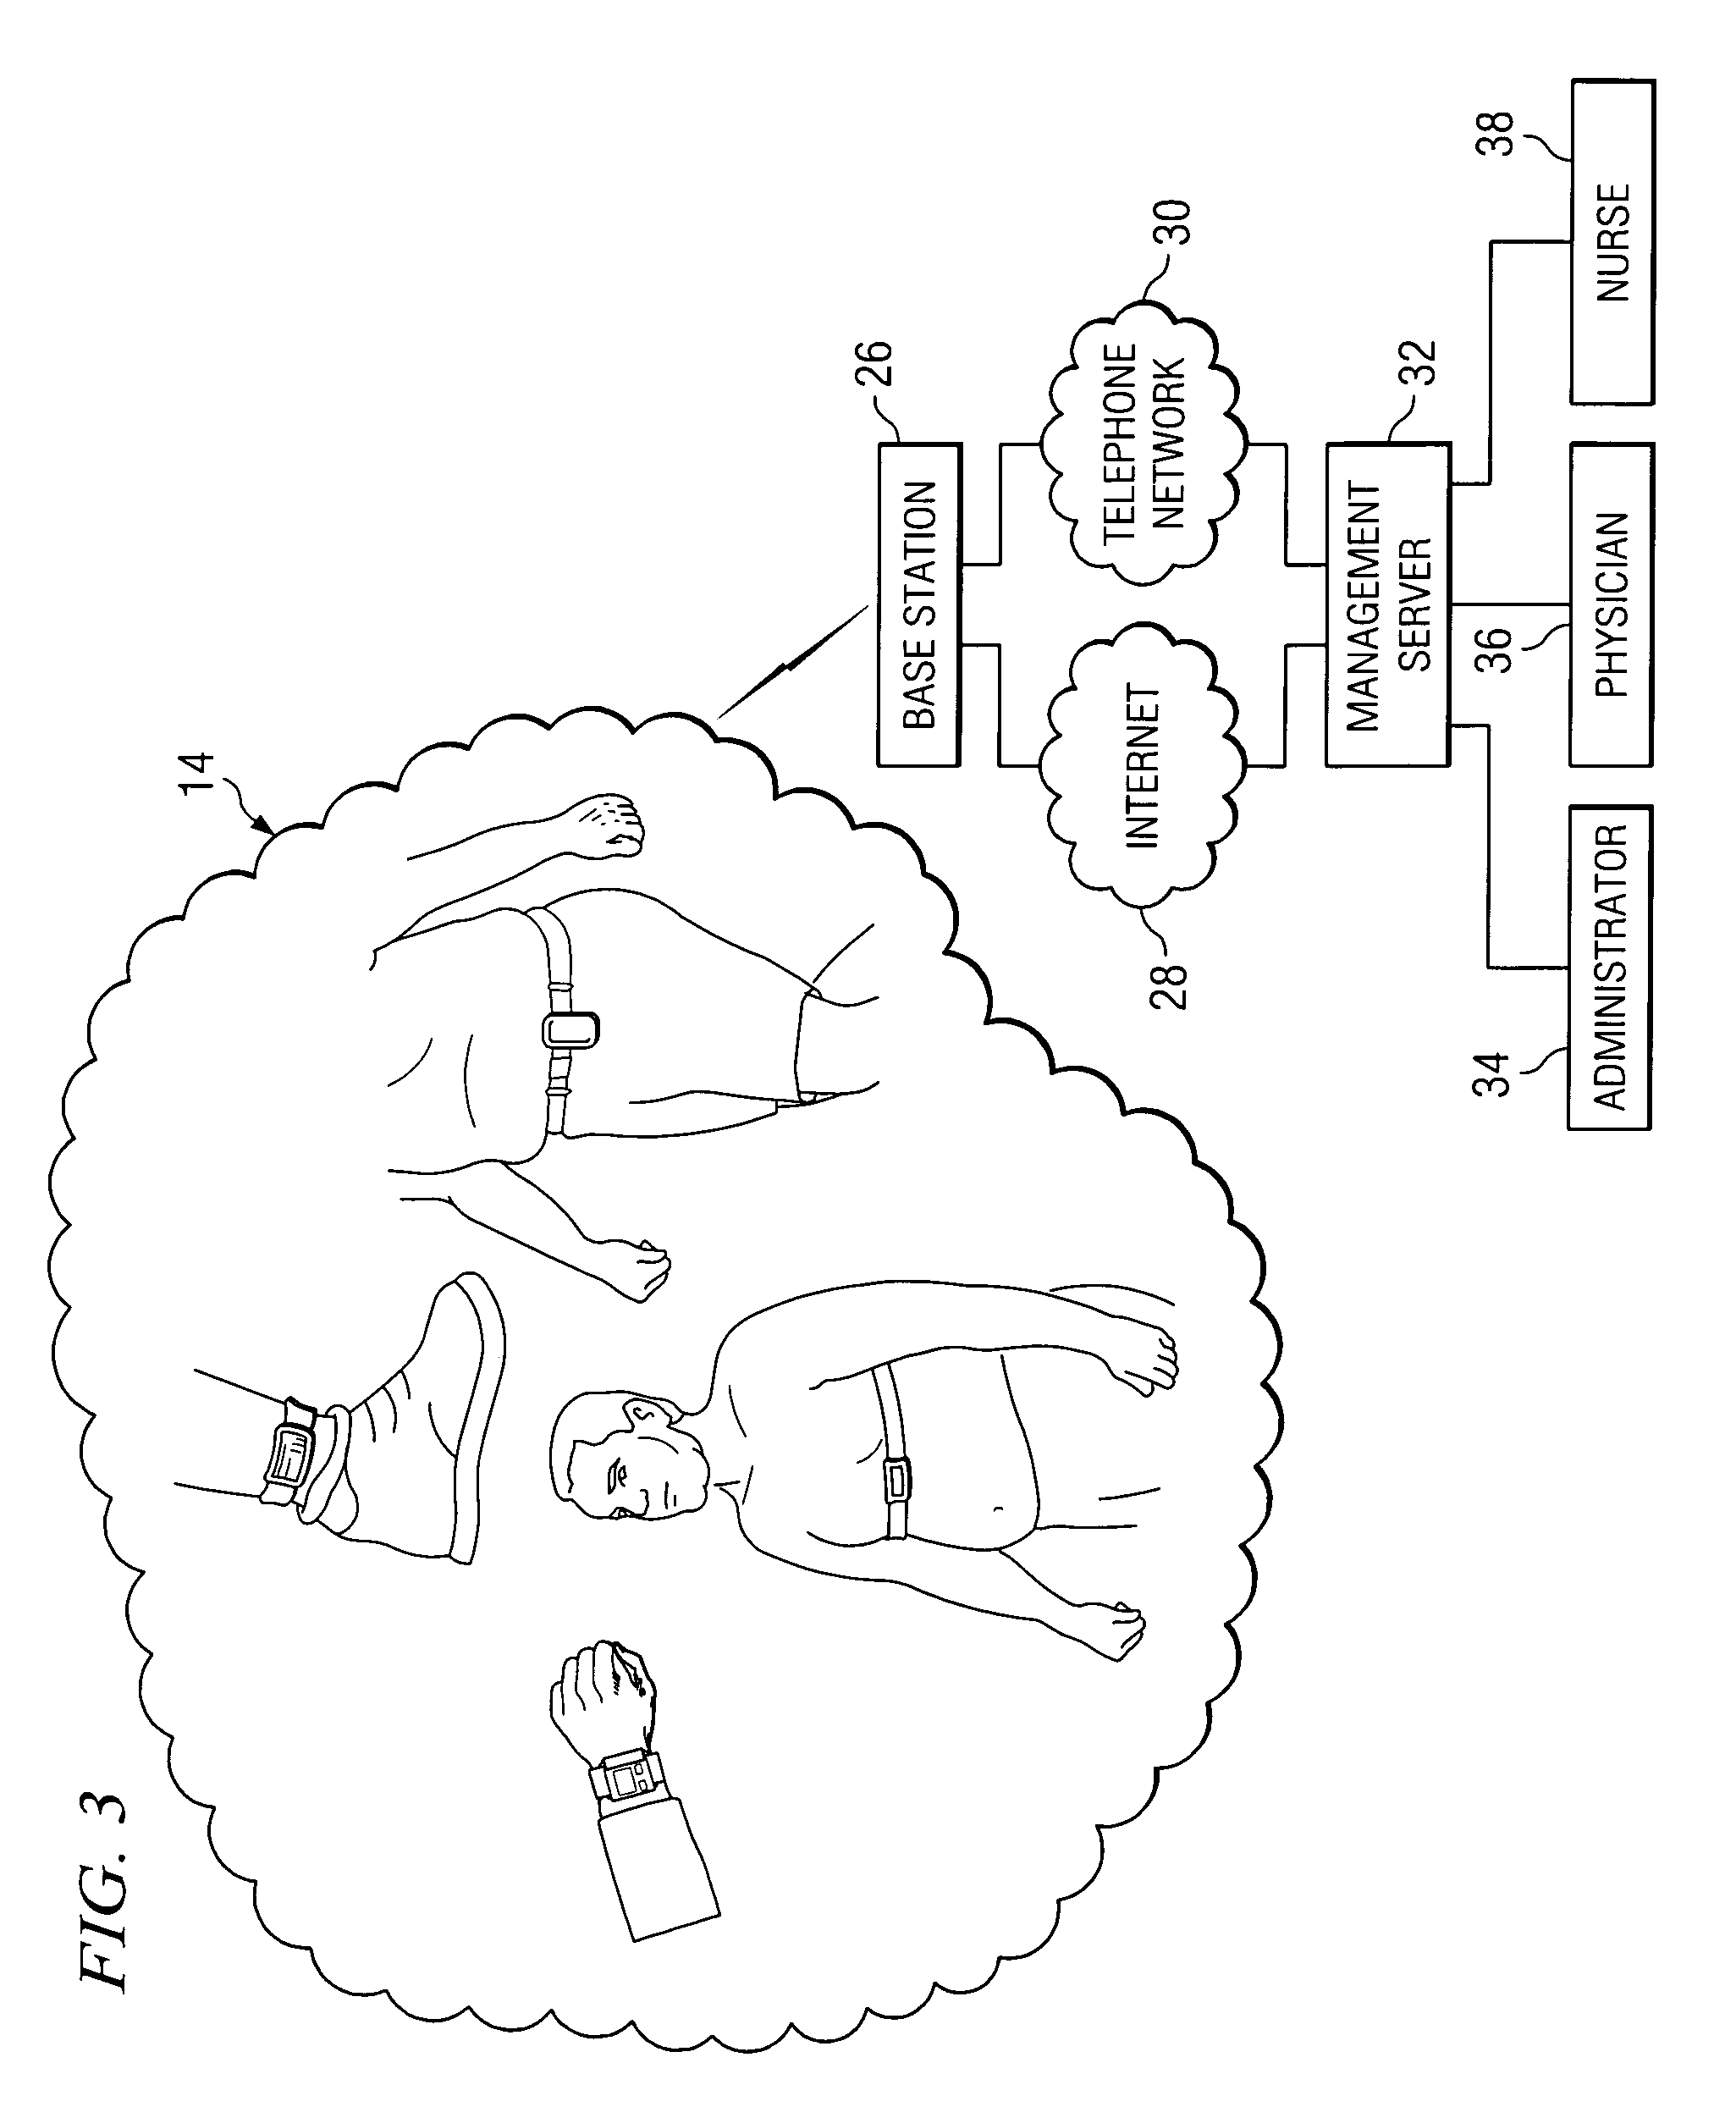 Accelerometer for data collection and communication